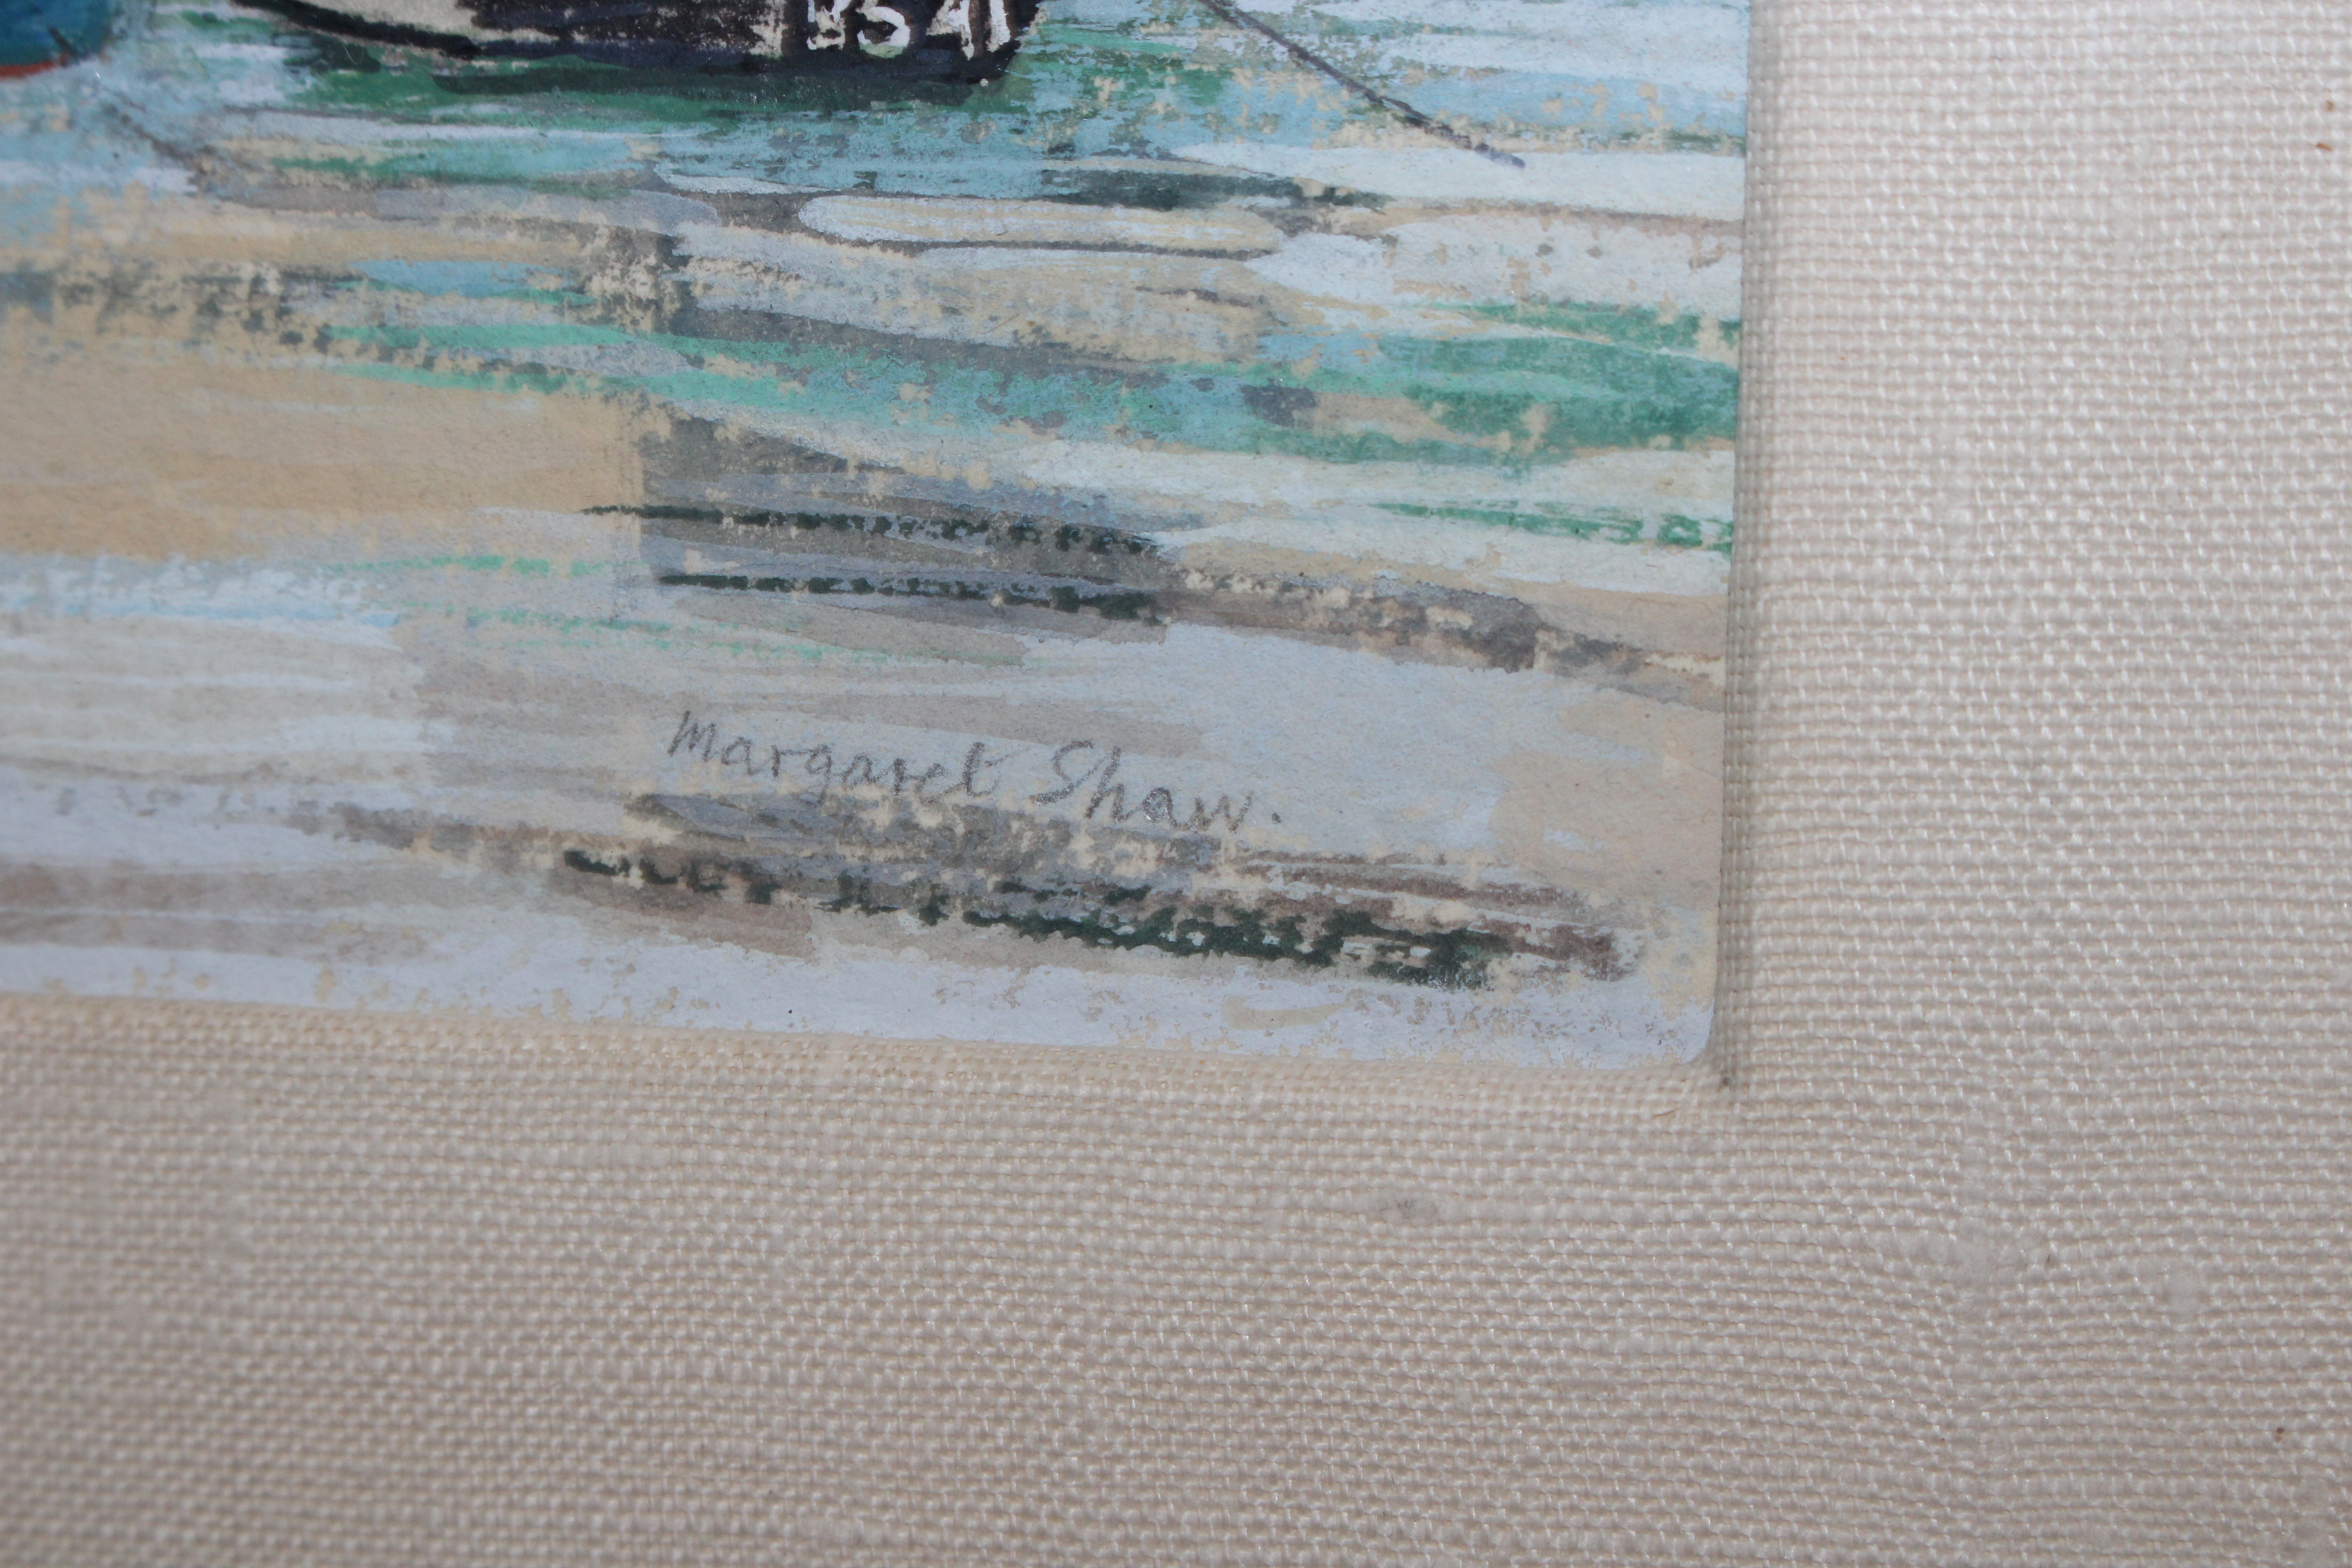 Margaret Shaw, watercolour study of a fishing vill - Image 3 of 3